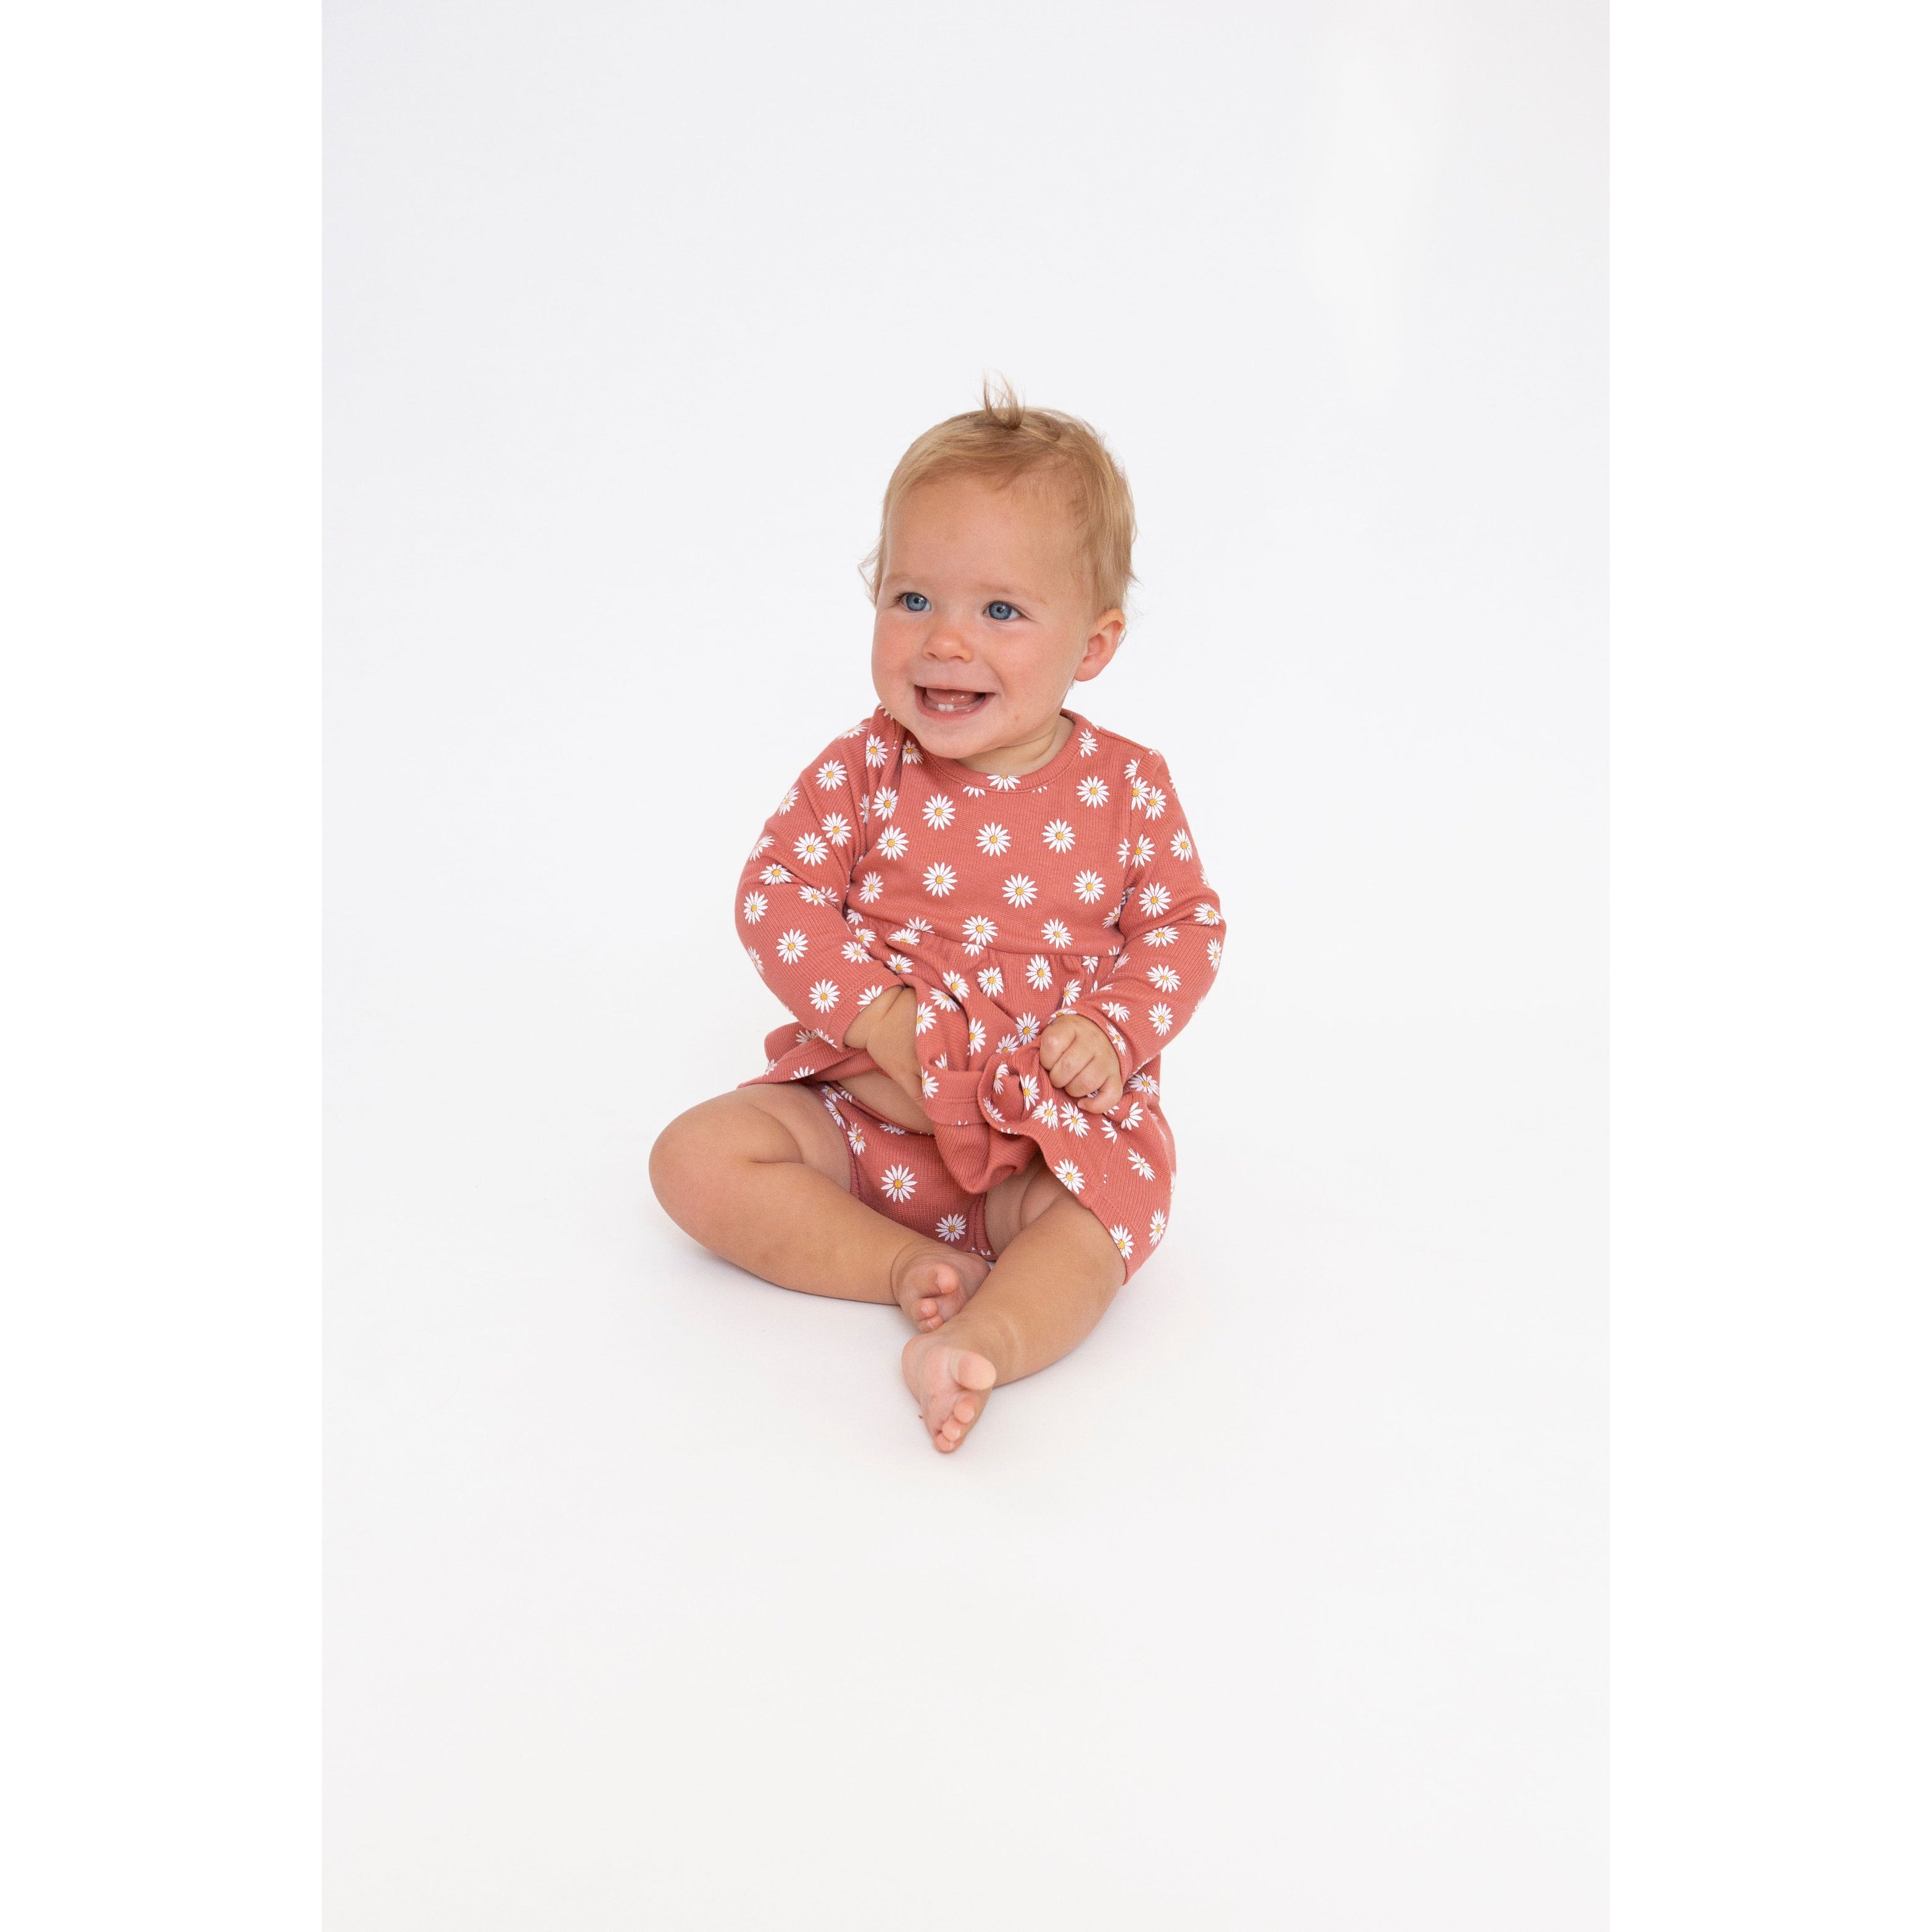 toddler girl wearing dark punch colored long sleeve dress and matching bloomers with white daisy dot print